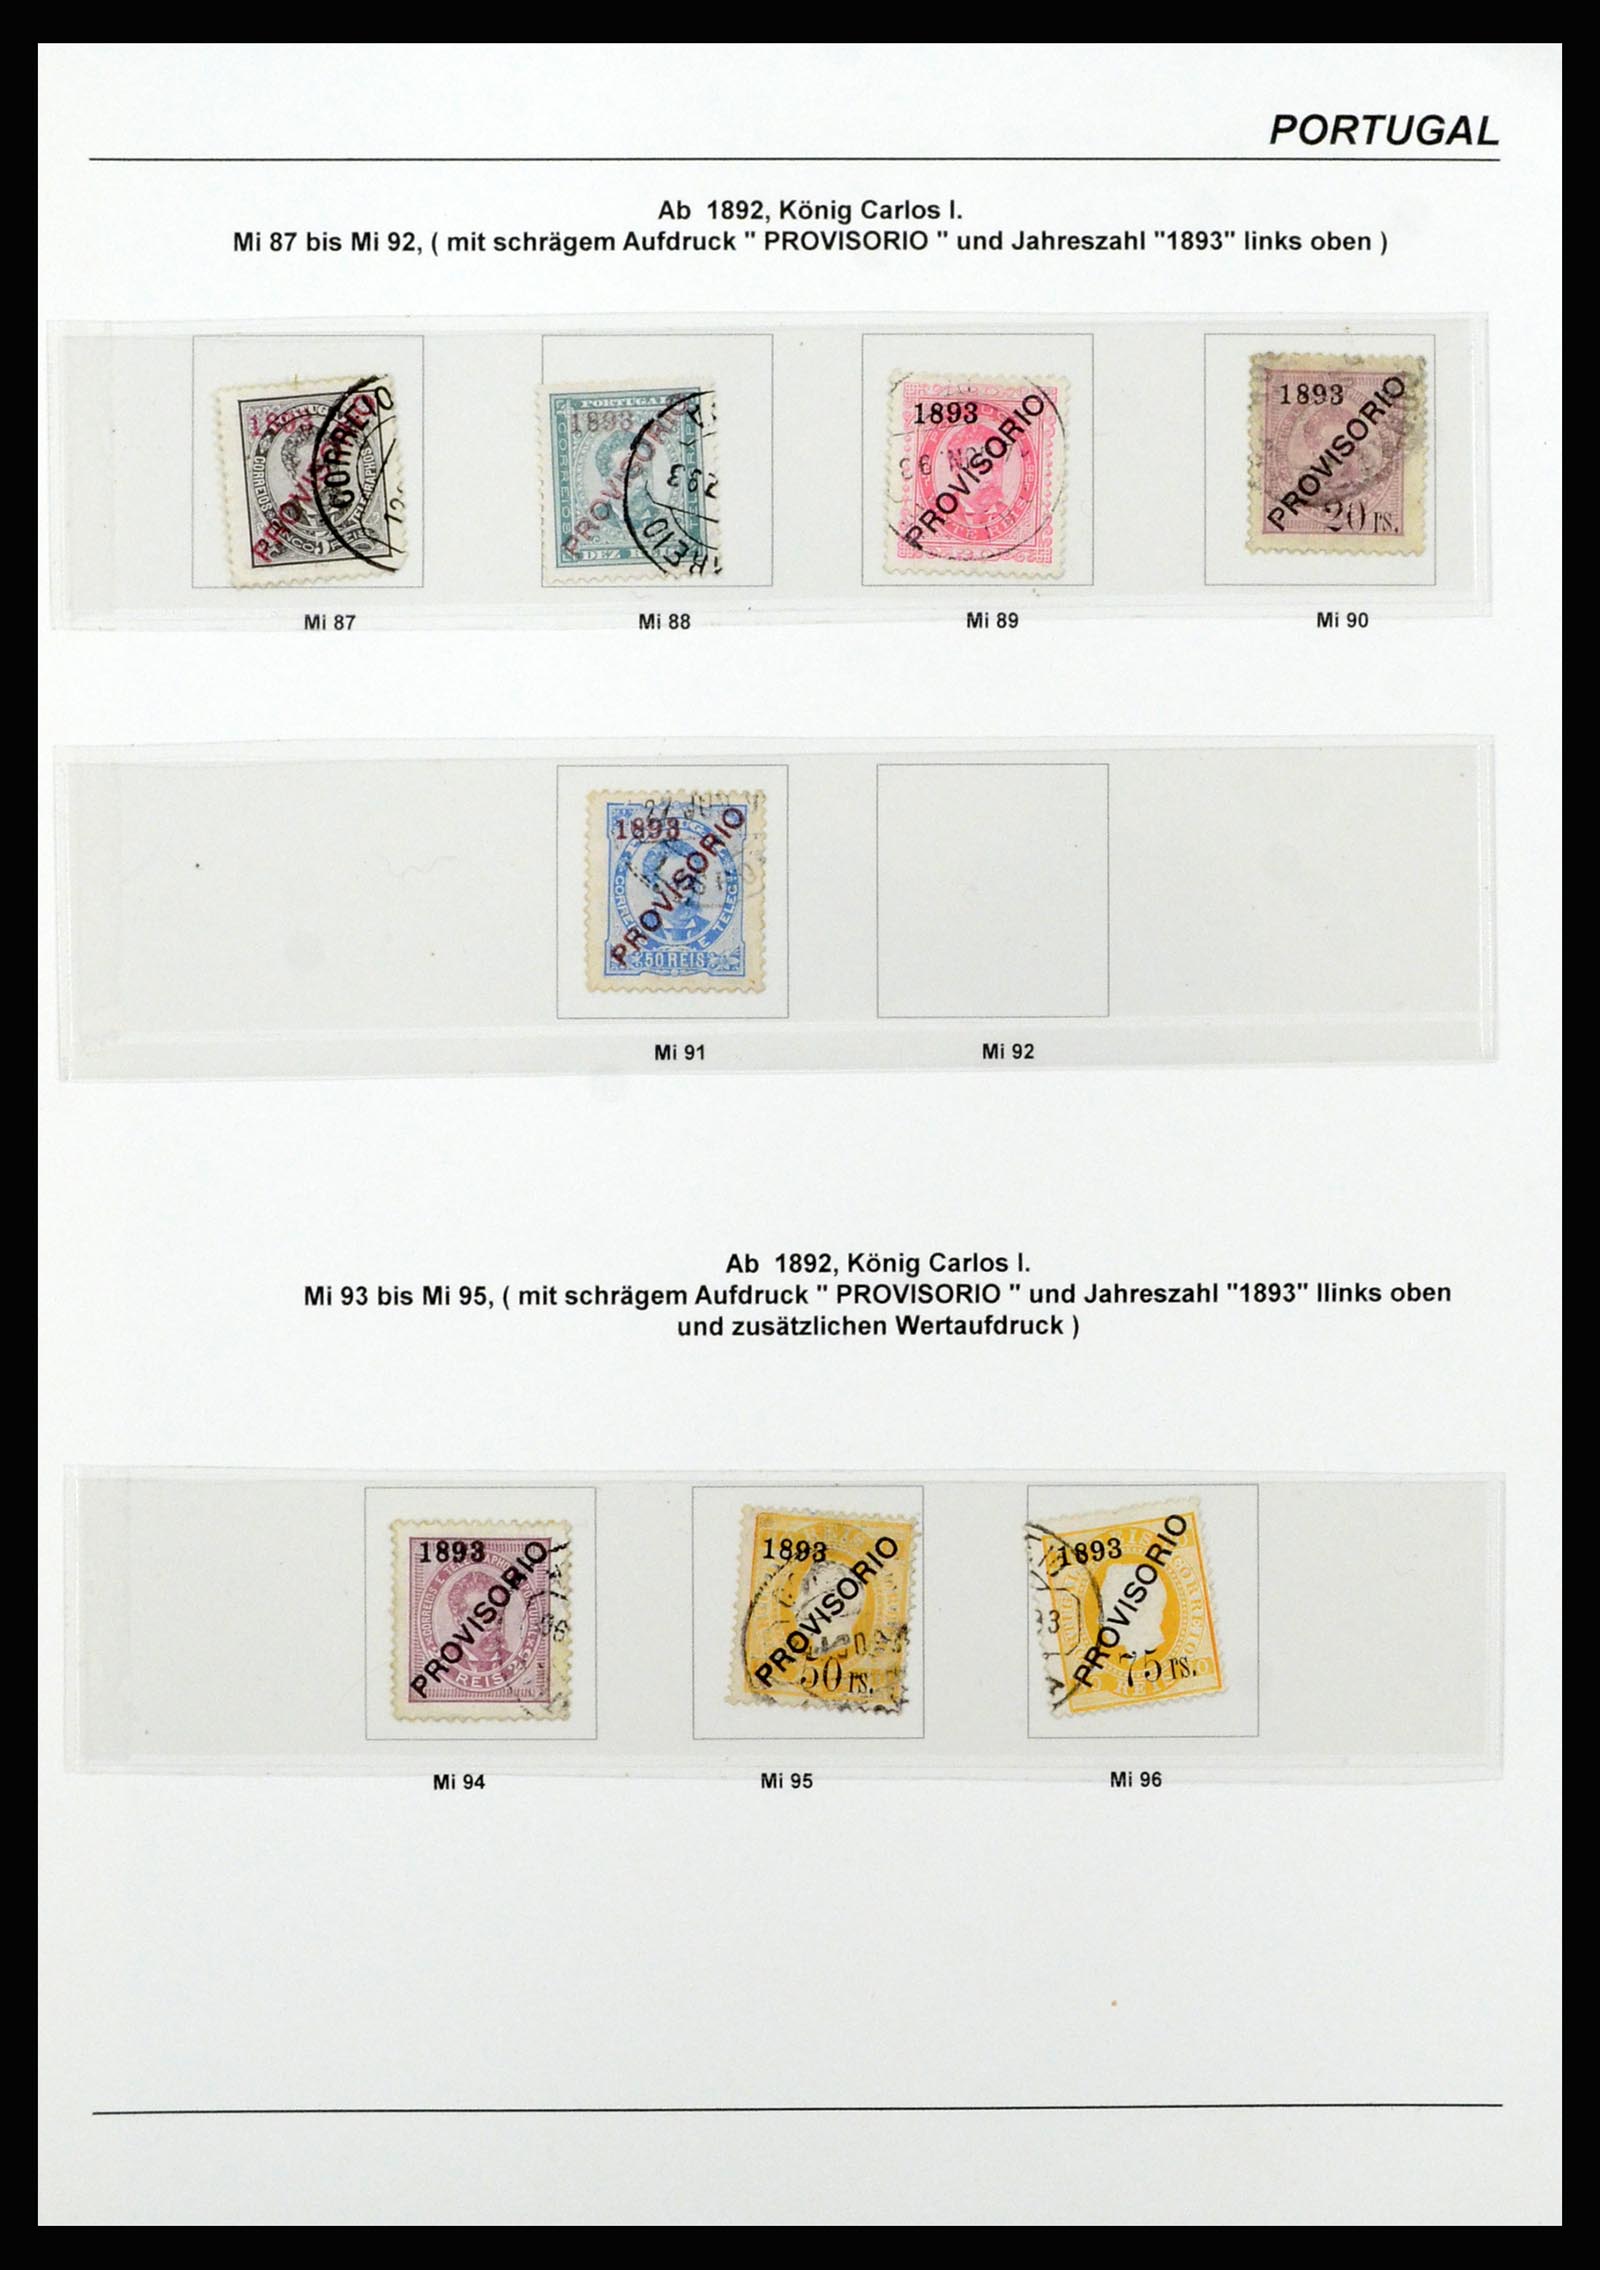 37133 052 - Stamp collection 37133 Portugal 1853-1893.